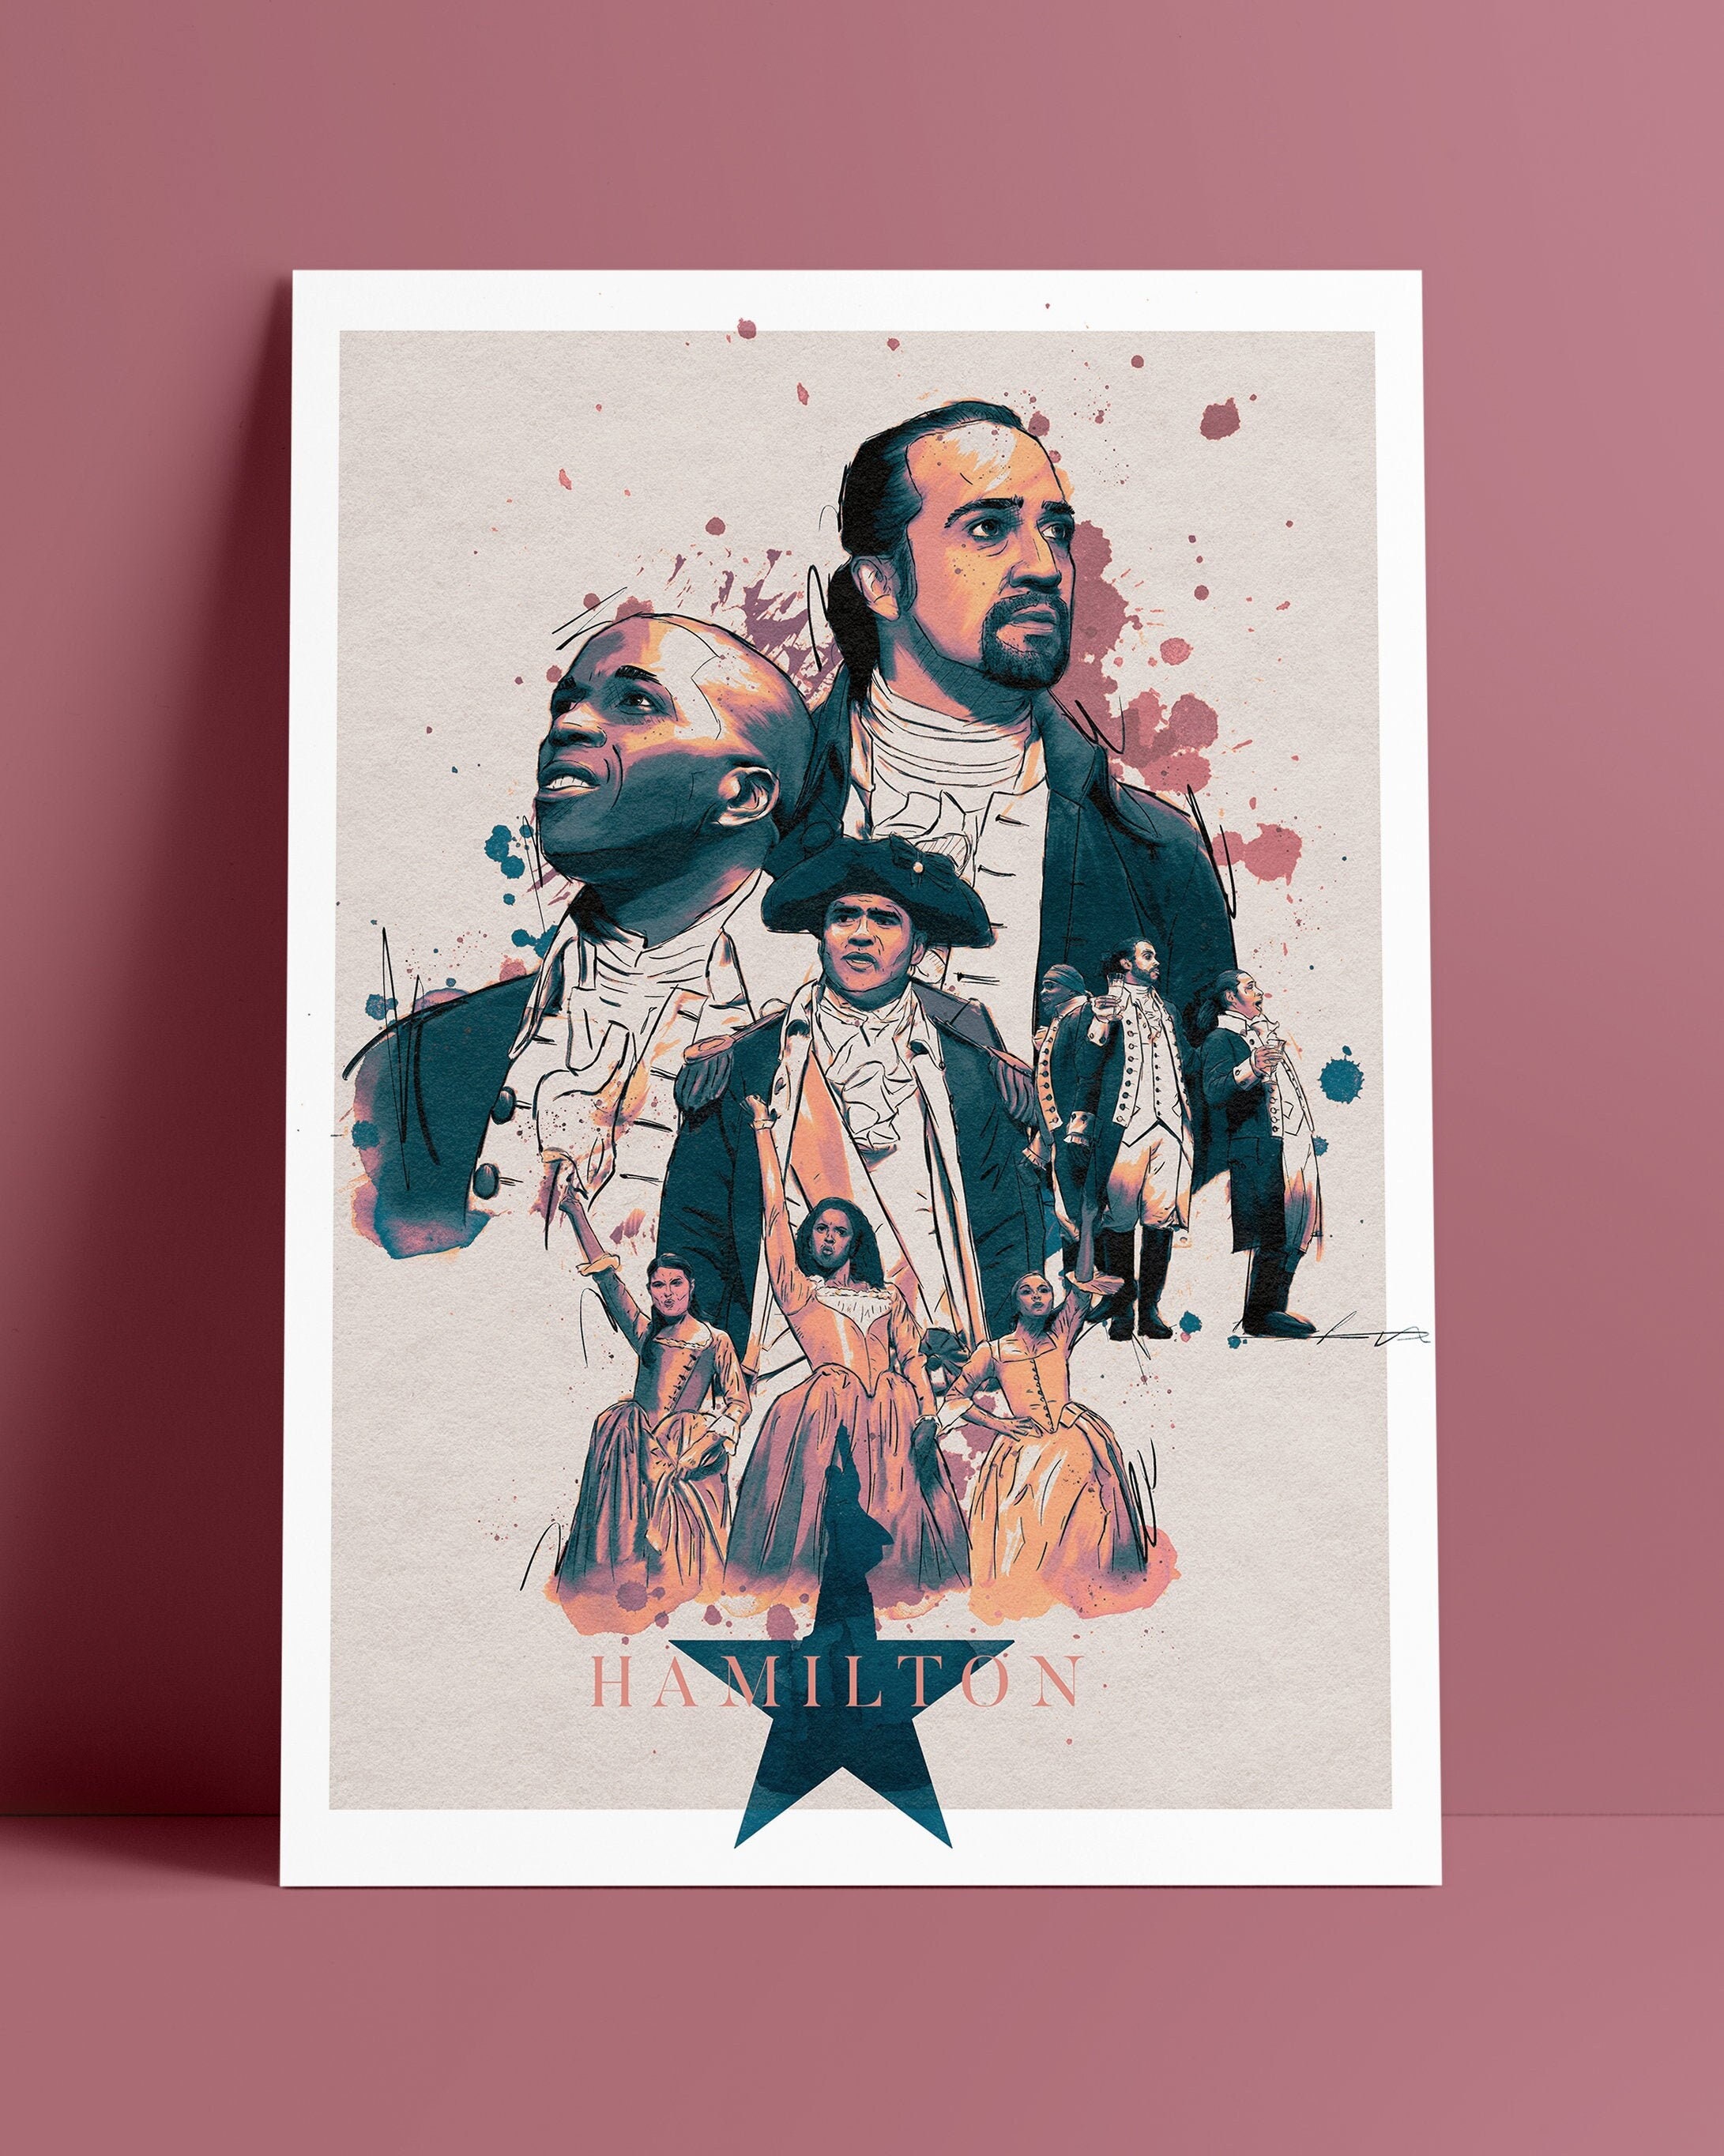 Hamilton the Greatest City in the World Poster 